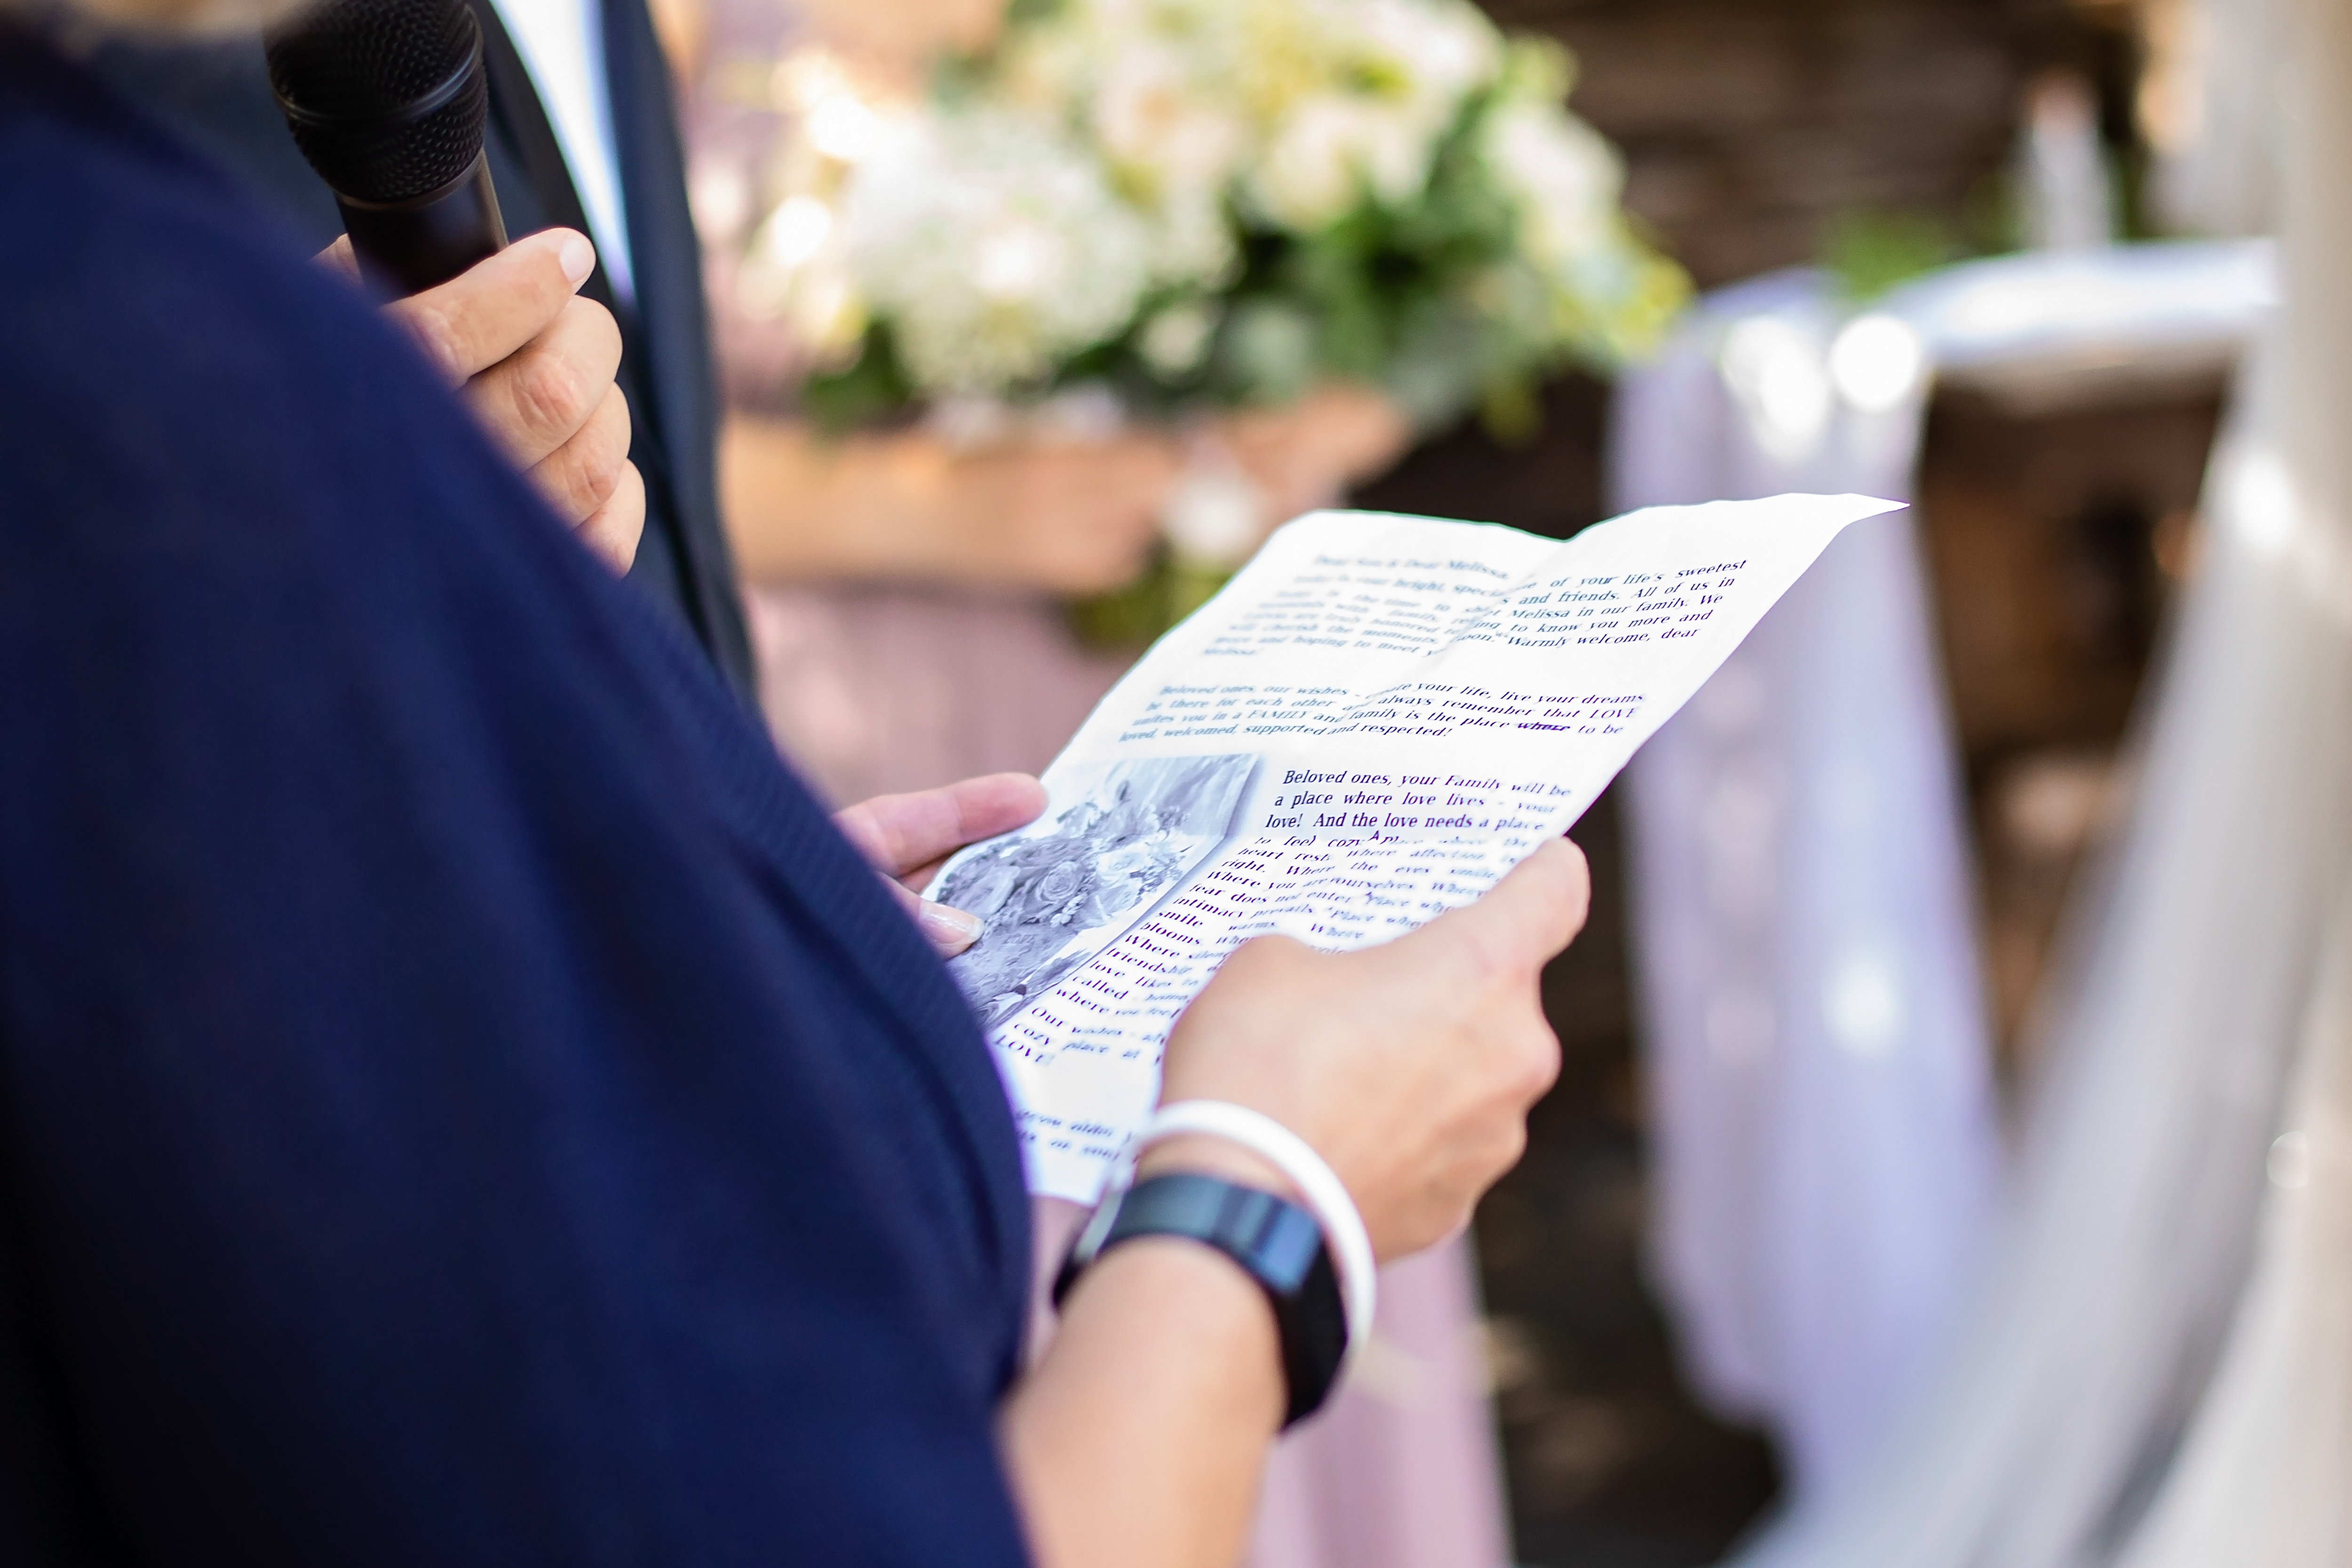 Special letter read during wedding ceremony